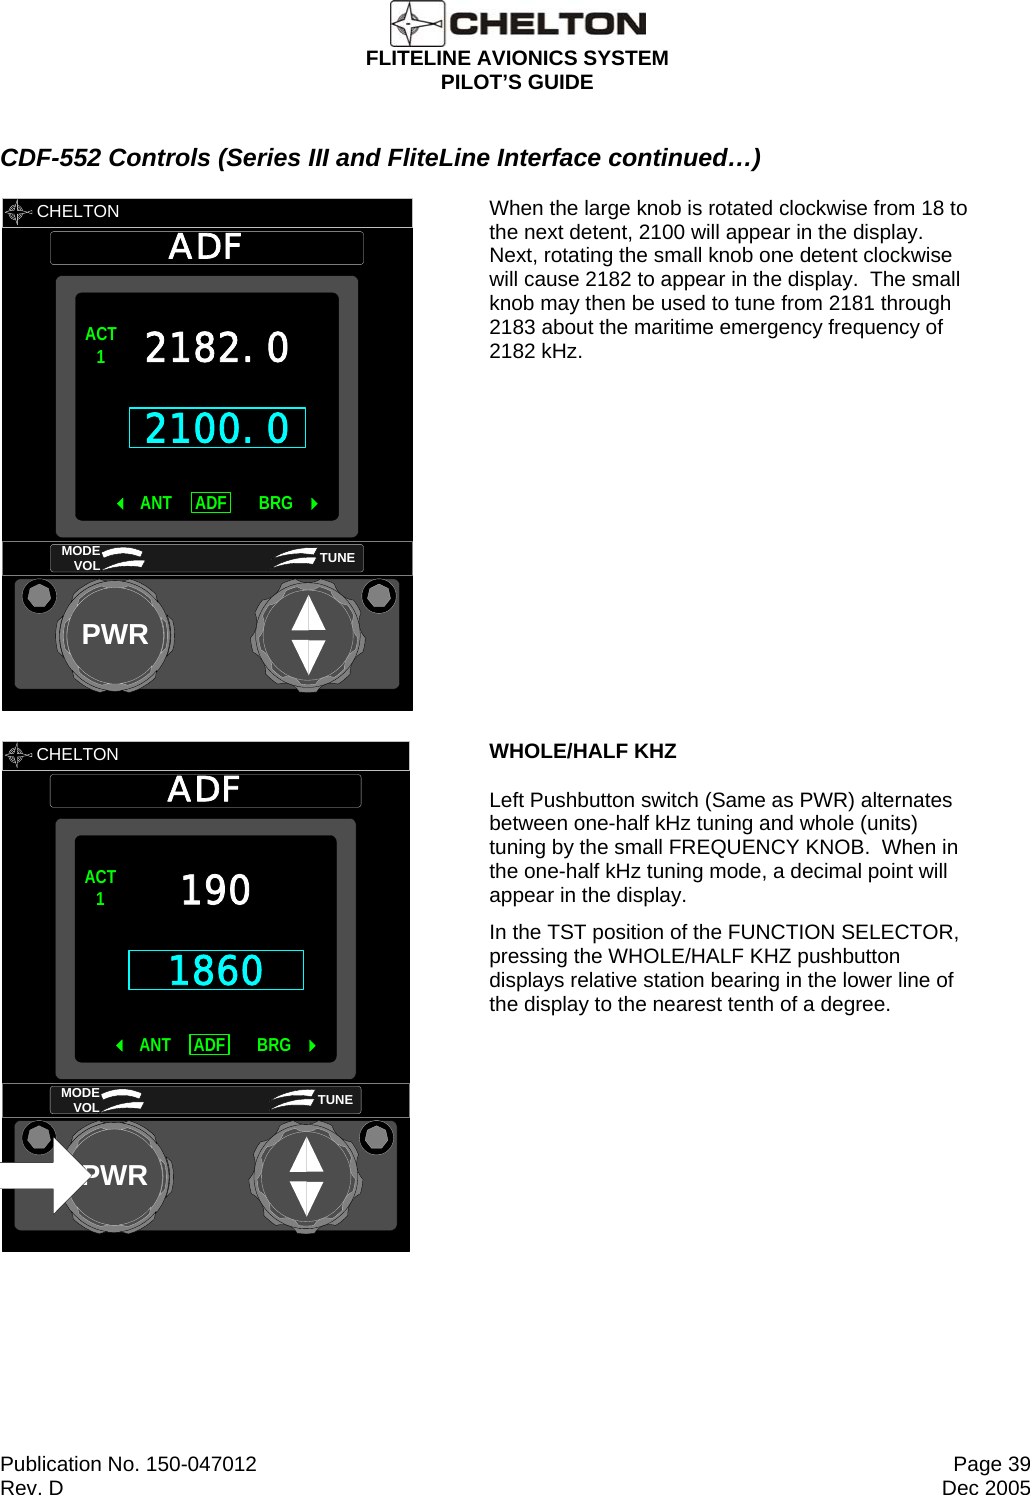  FLITELINE AVIONICS SYSTEM PILOT’S GUIDE  Publication No. 150-047012  Page 39 Rev. D  Dec 2005 CDF-552 Controls (Series III and FliteLine Interface continued…)        CHELTON ADFPWR2100.0ACT1 ANT BRGADF 2182.0MODE VOL TUNE  When the large knob is rotated clockwise from 18 to the next detent, 2100 will appear in the display.  Next, rotating the small knob one detent clockwise will cause 2182 to appear in the display.  The small knob may then be used to tune from 2181 through 2183 about the maritime emergency frequency of 2182 kHz.       CHELTON ADFPWR1860ACT1 ANT BRGADF 190MODE VOL TUNE       WHOLE/HALF KHZ  Left Pushbutton switch (Same as PWR) alternates between one-half kHz tuning and whole (units) tuning by the small FREQUENCY KNOB.  When in the one-half kHz tuning mode, a decimal point will appear in the display. In the TST position of the FUNCTION SELECTOR, pressing the WHOLE/HALF KHZ pushbutton displays relative station bearing in the lower line of the display to the nearest tenth of a degree. 